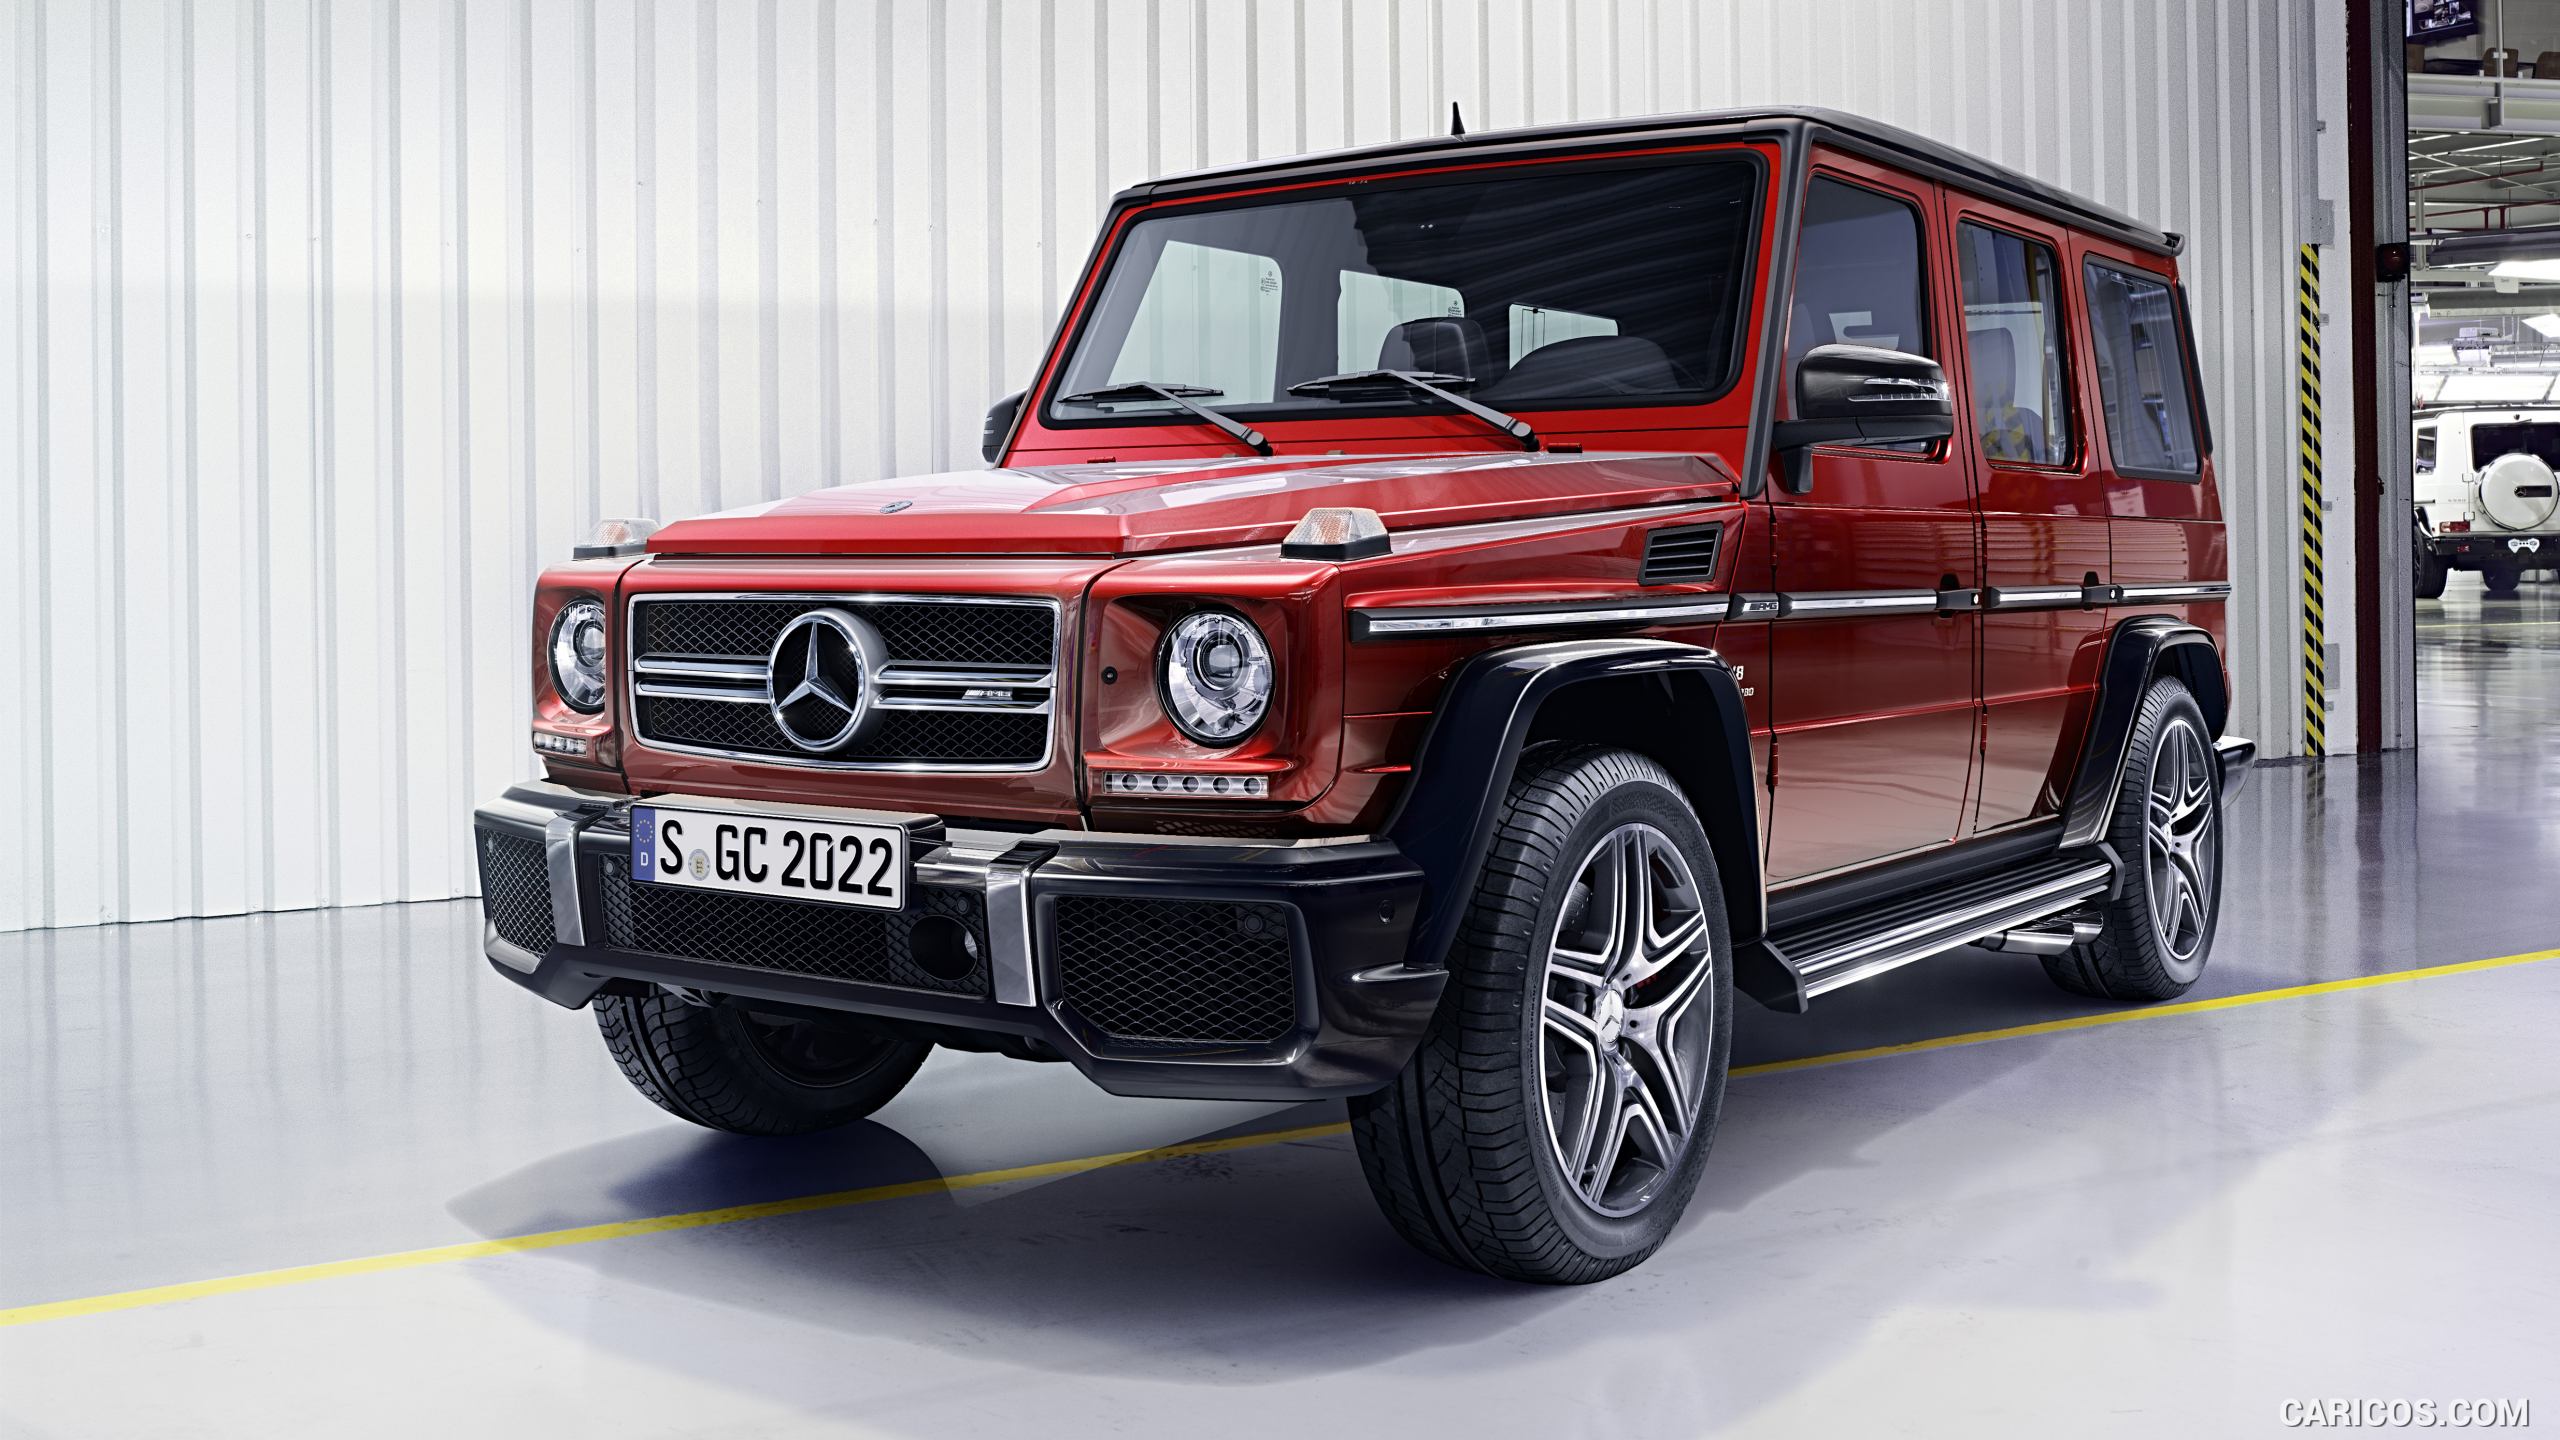 2016 Mercedes-AMG G63 (Tomatored) - Front, #9 of 48